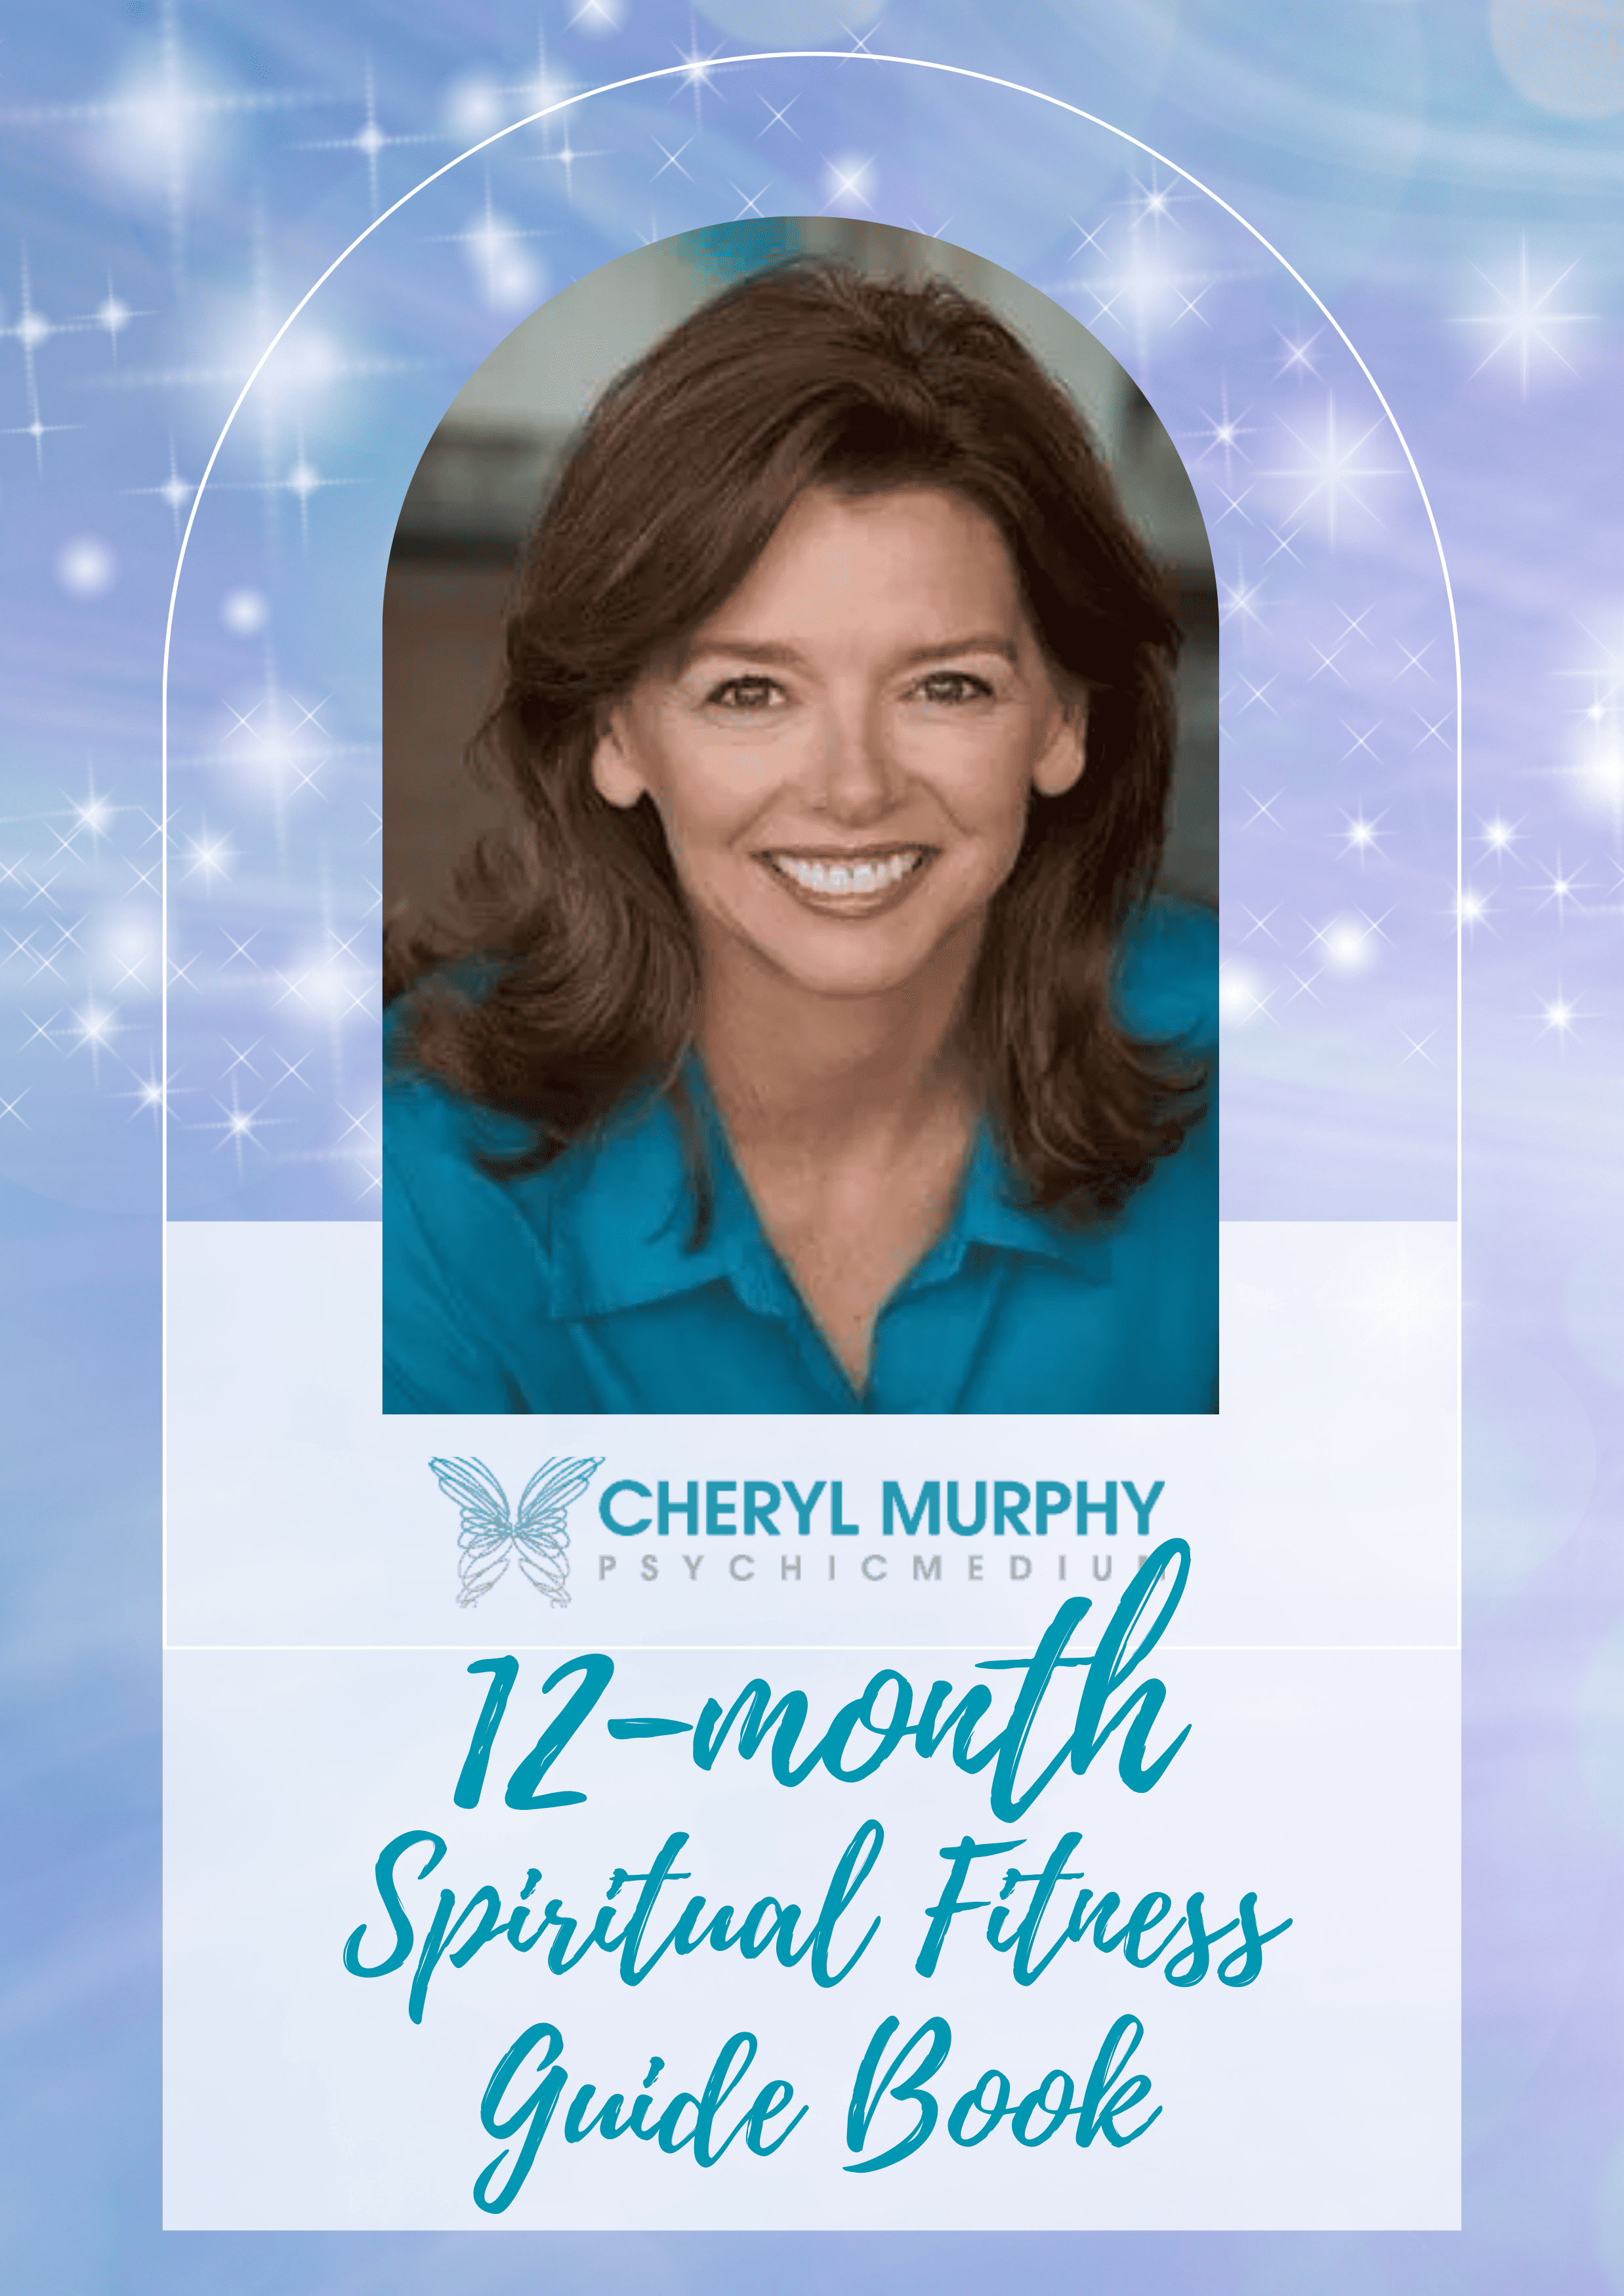 12-month Spiritual Fitness Guide Book